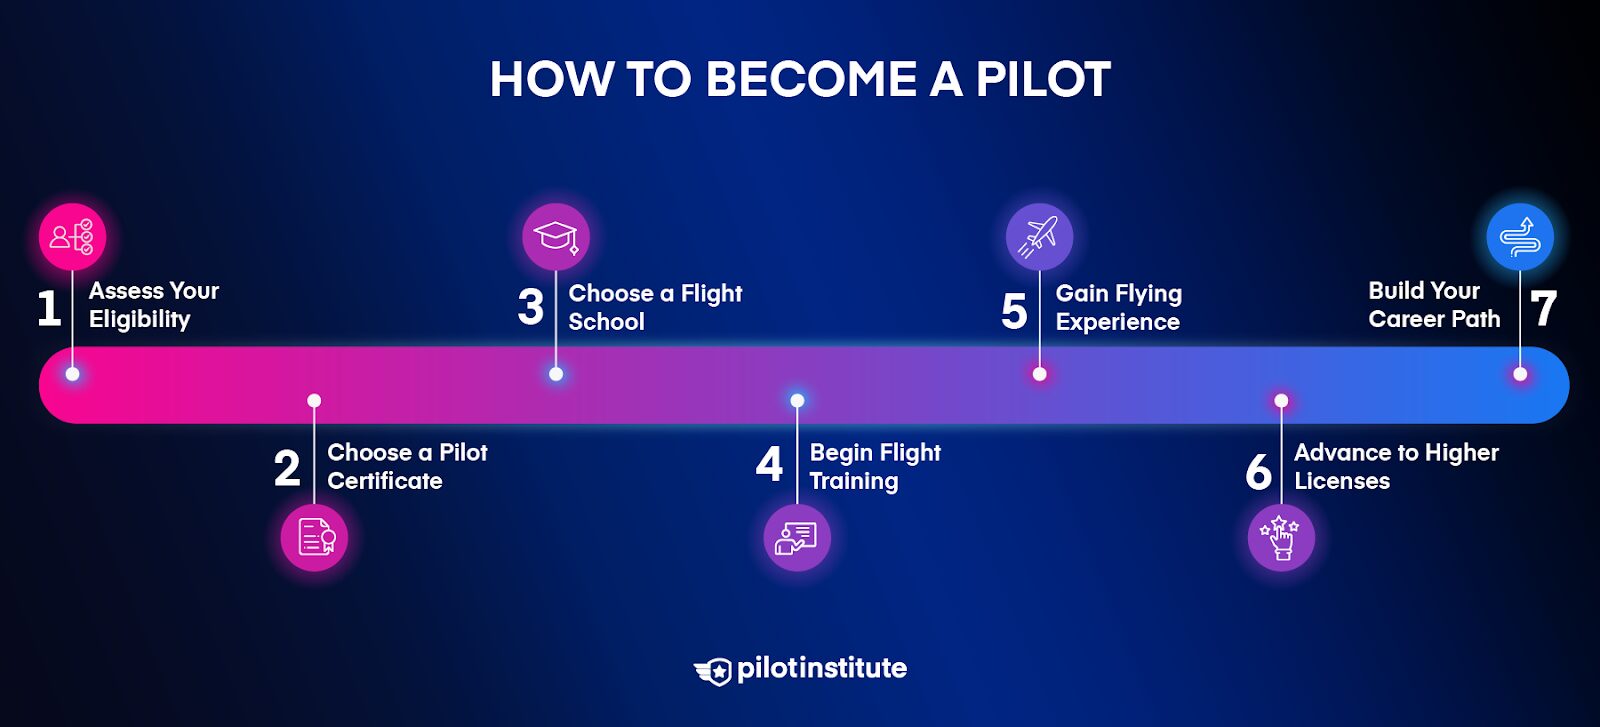 A diagram outlining the path to becoming a pilot.